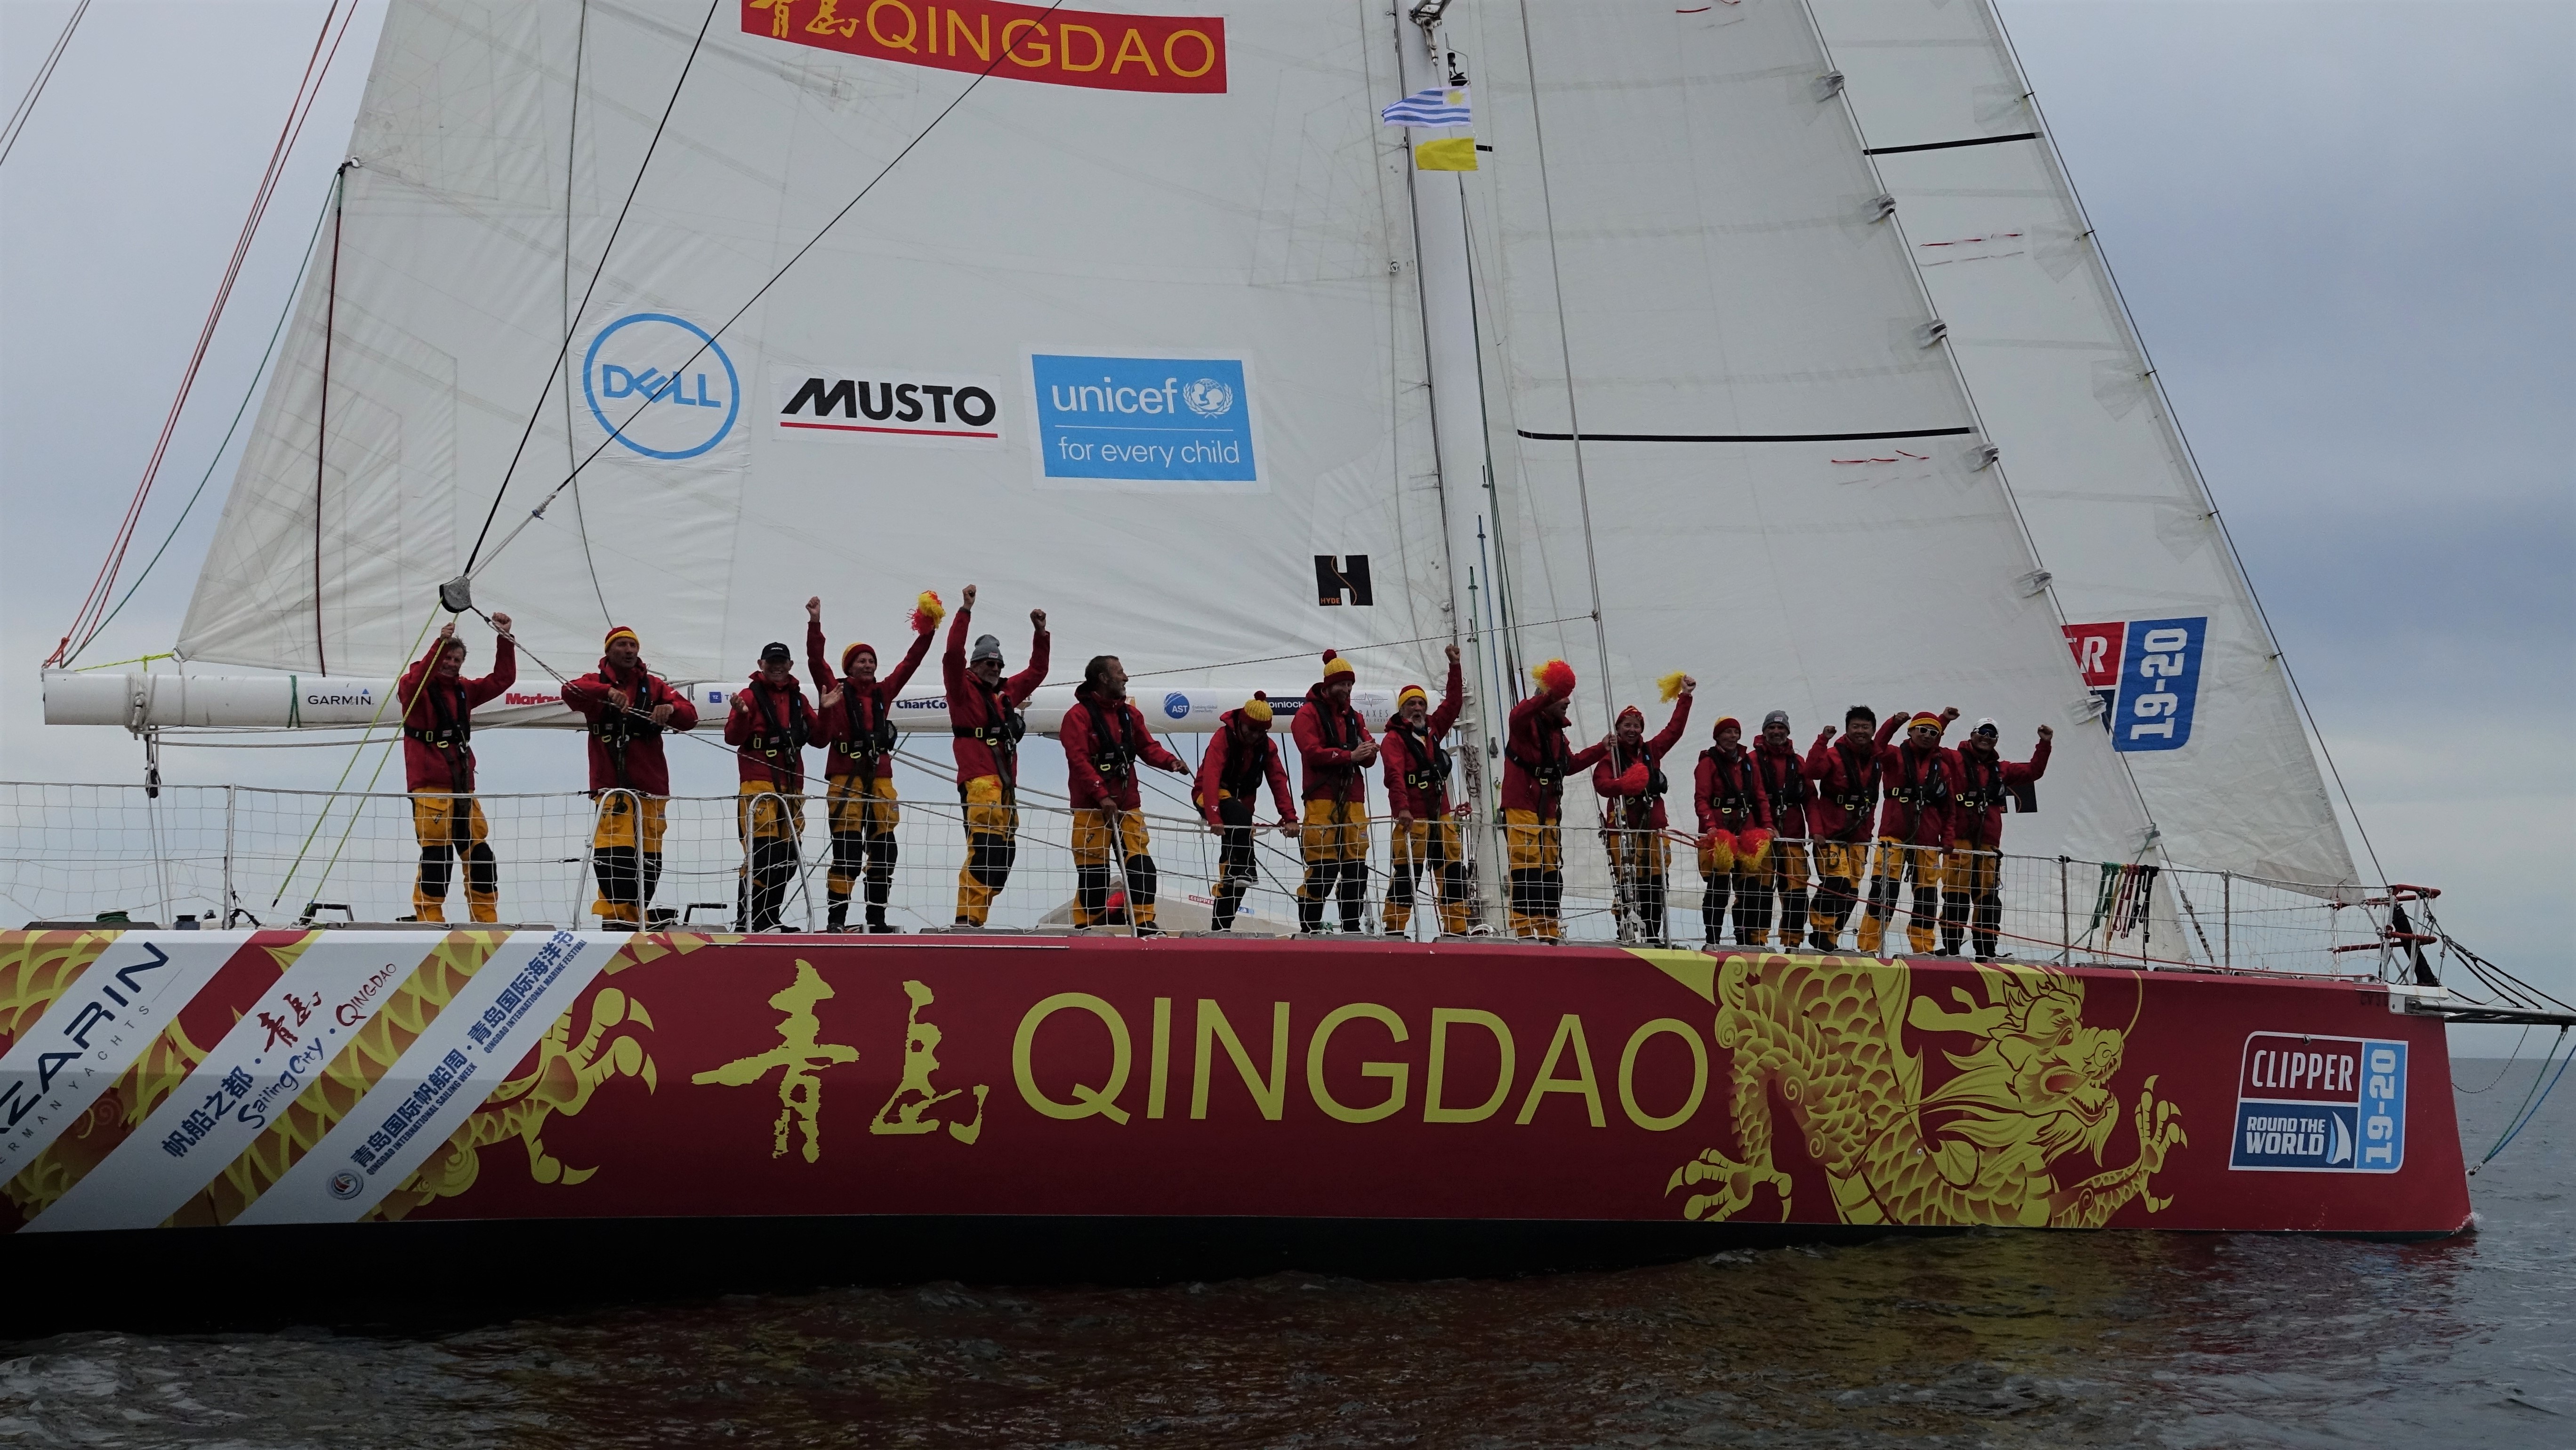 The crew of Qingdao celebrate winning first place into Punta del Este